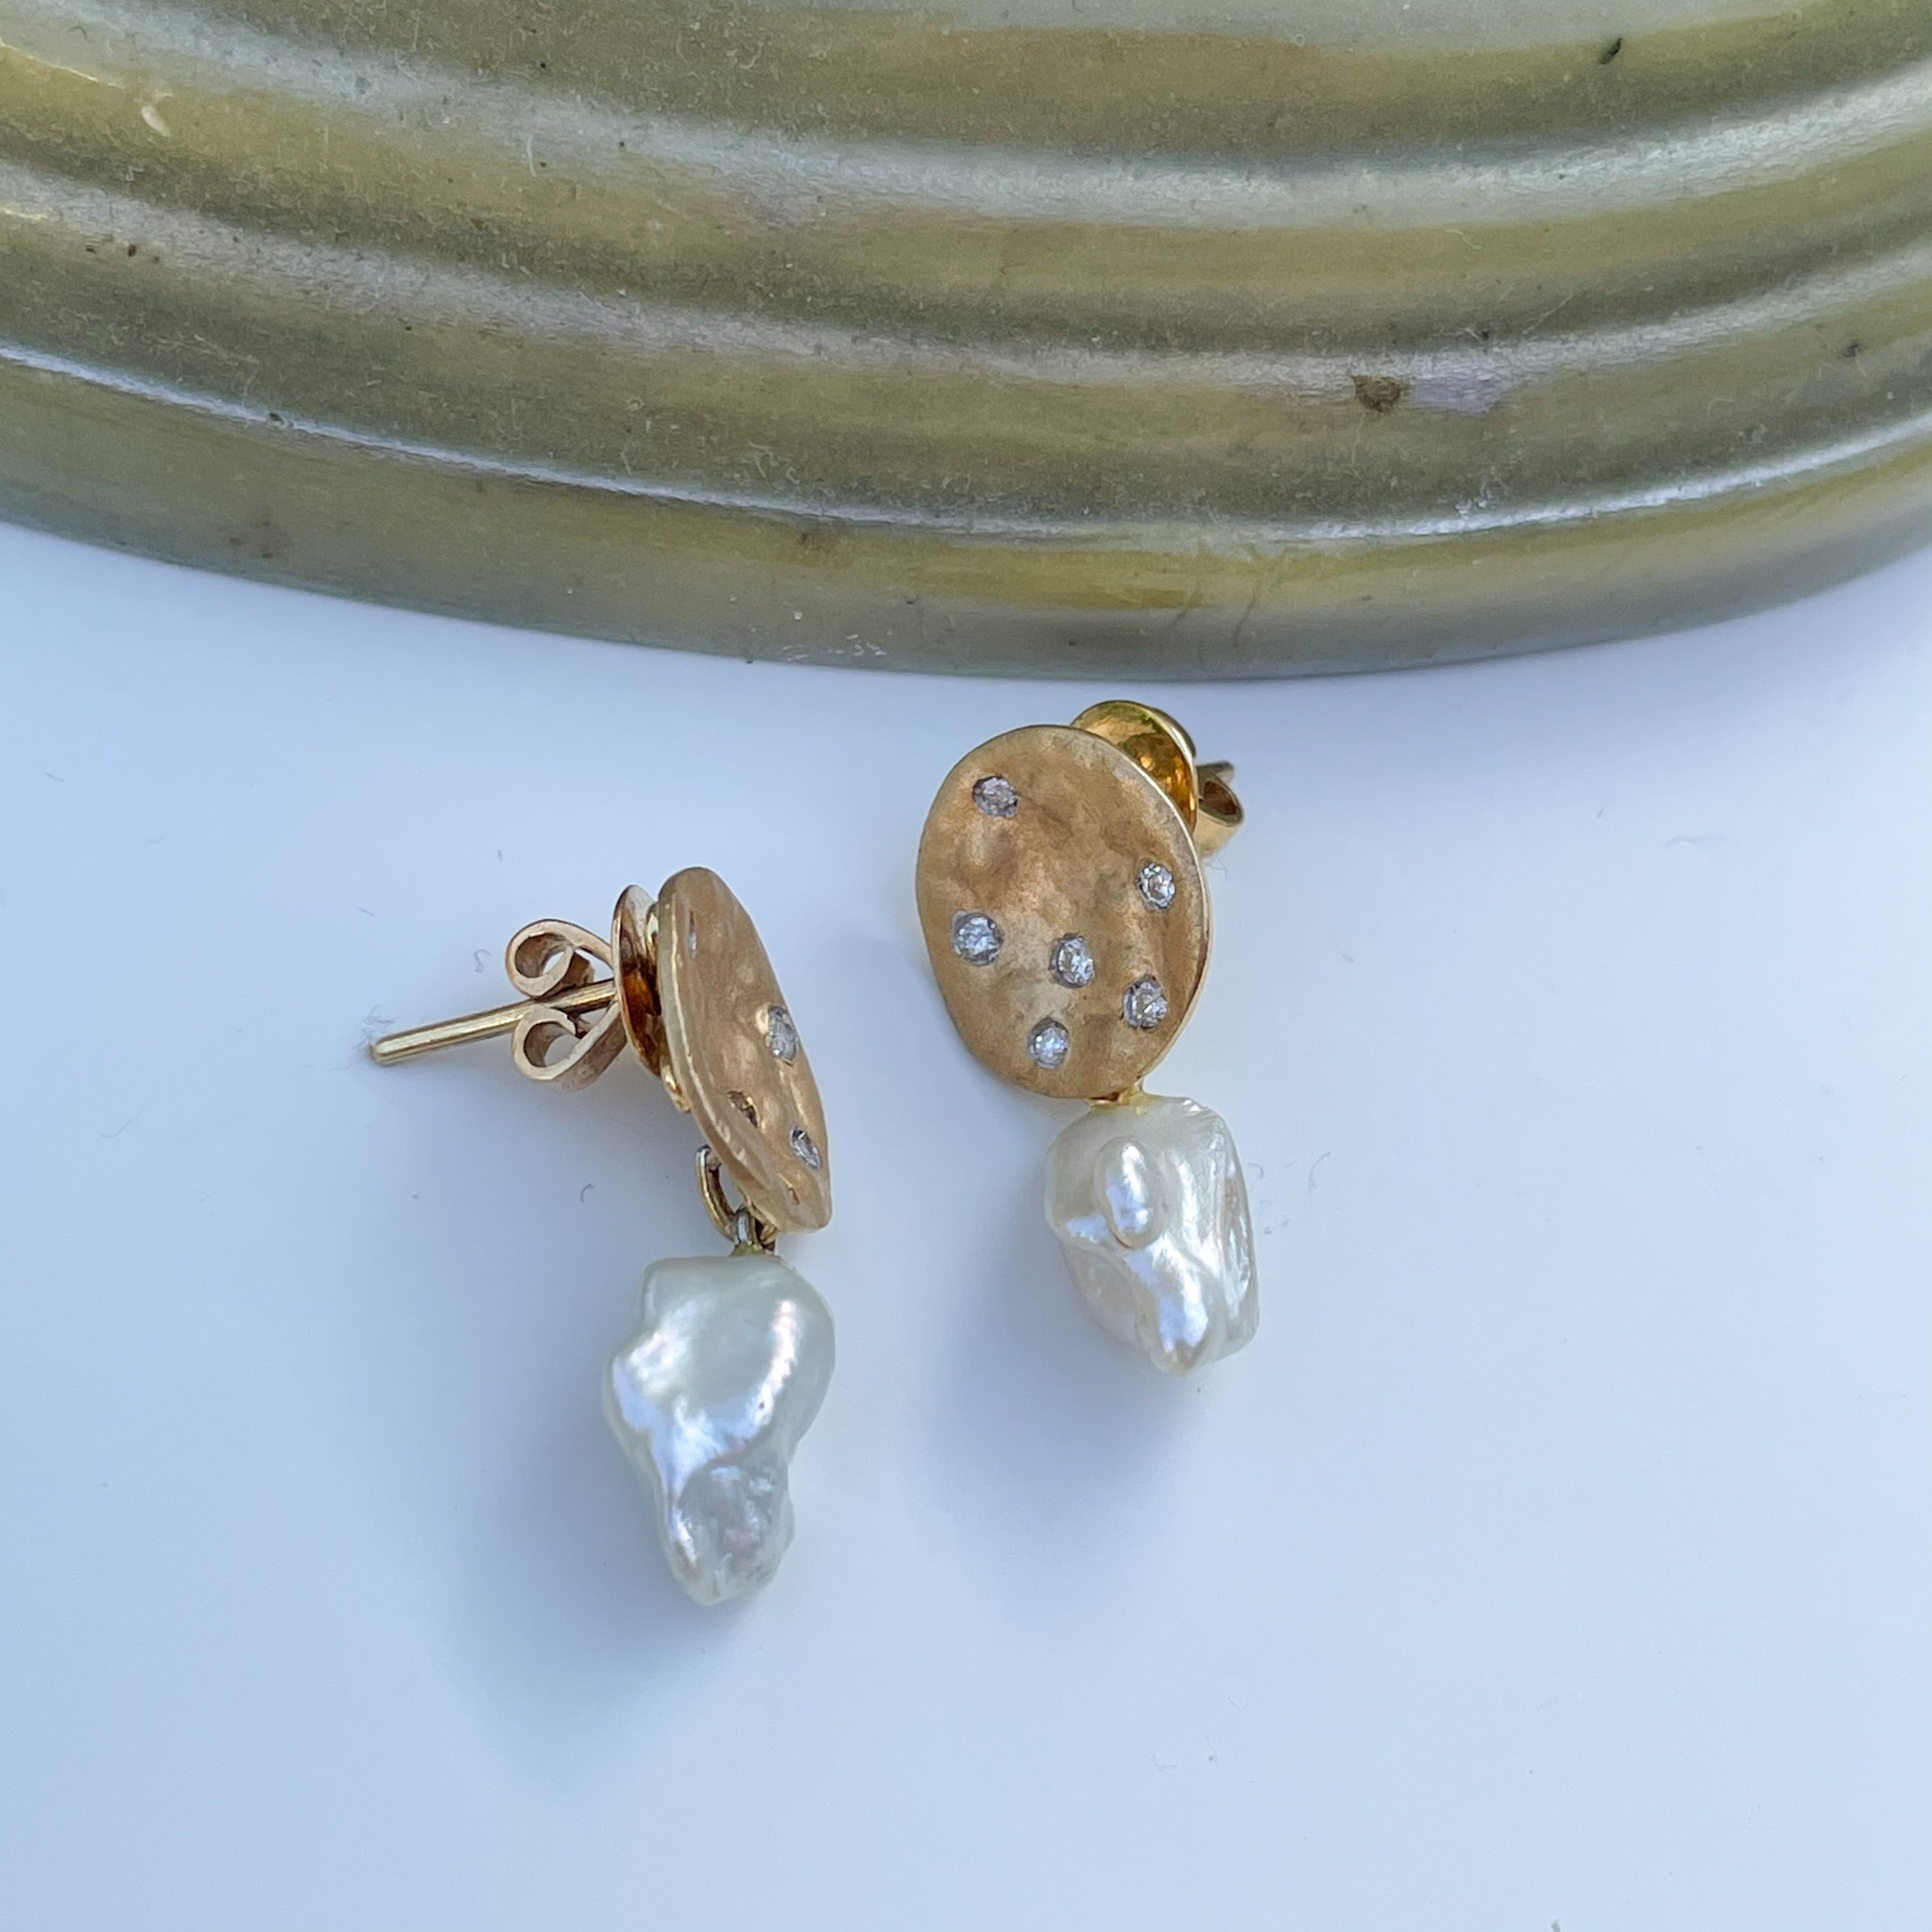 Earrings in 9k Yellow Gold with White Pearl Drop and Diamonds